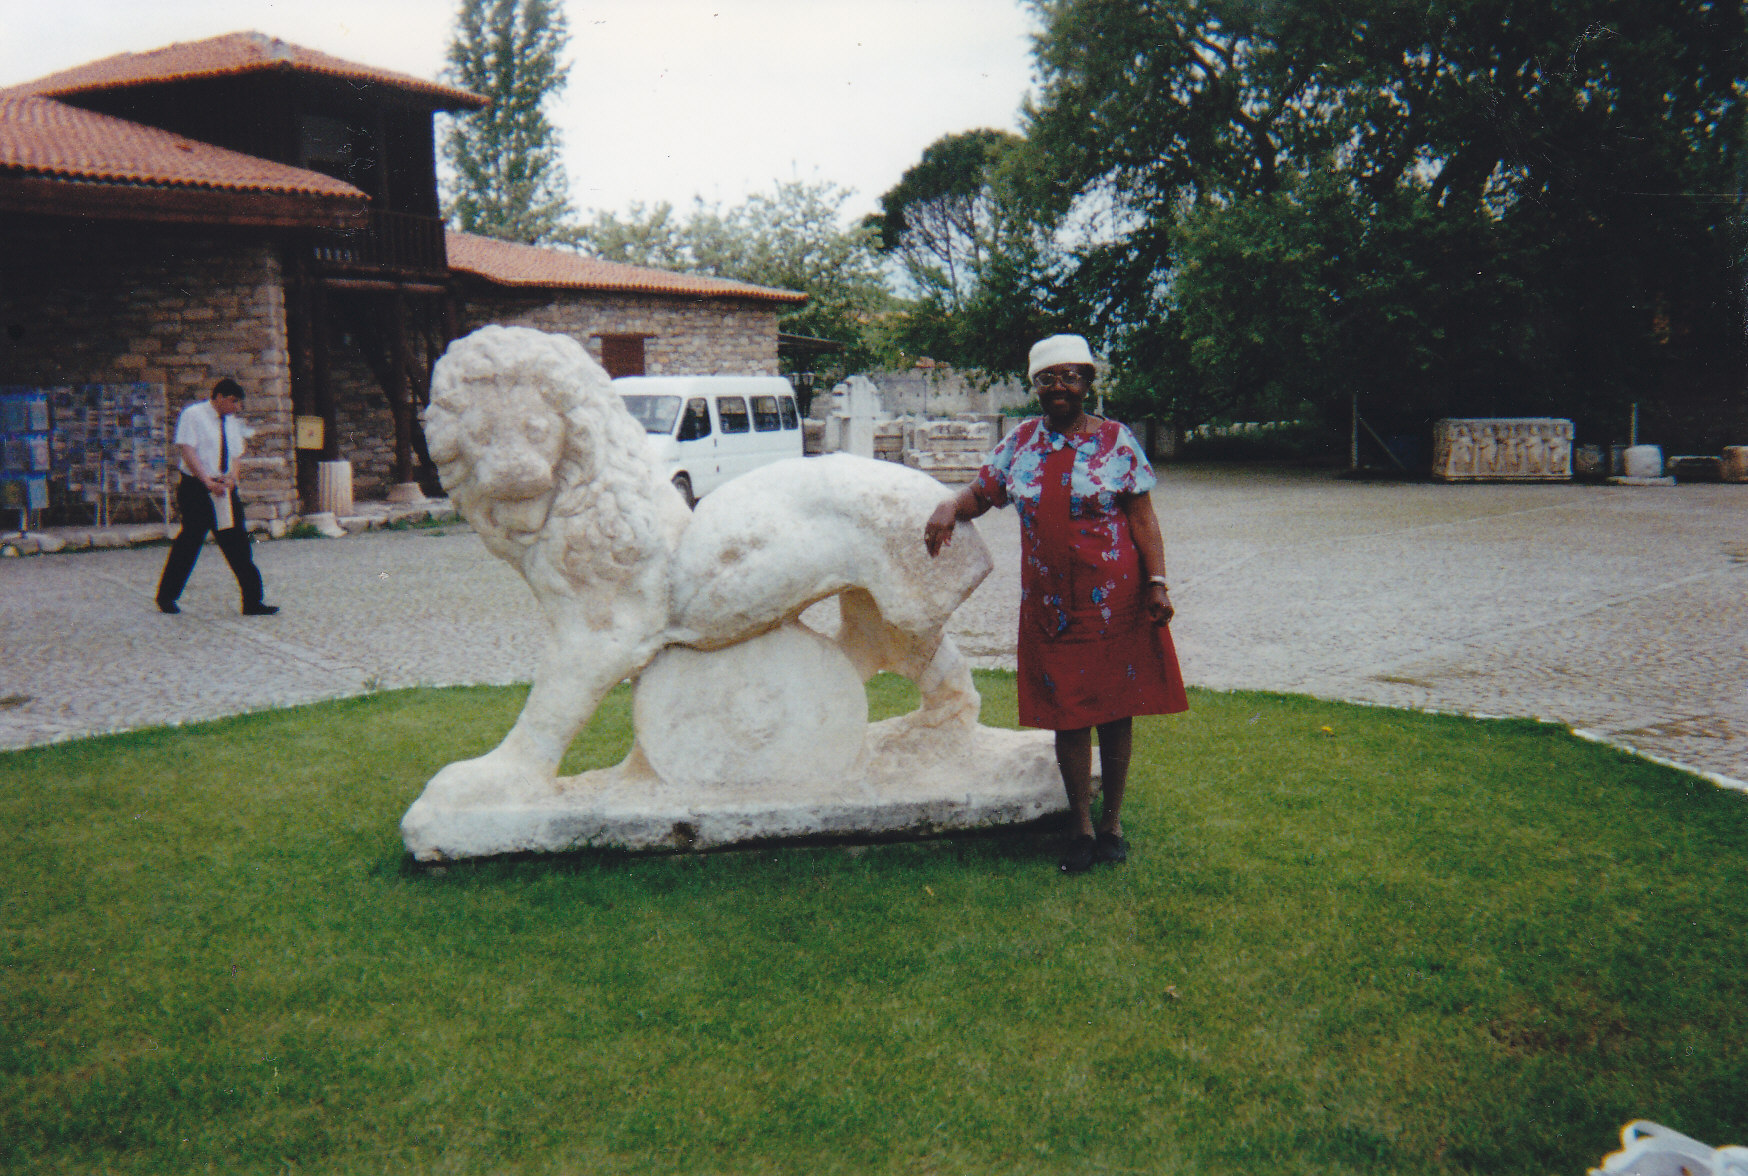 Barbara Leaning on Statue of Lion